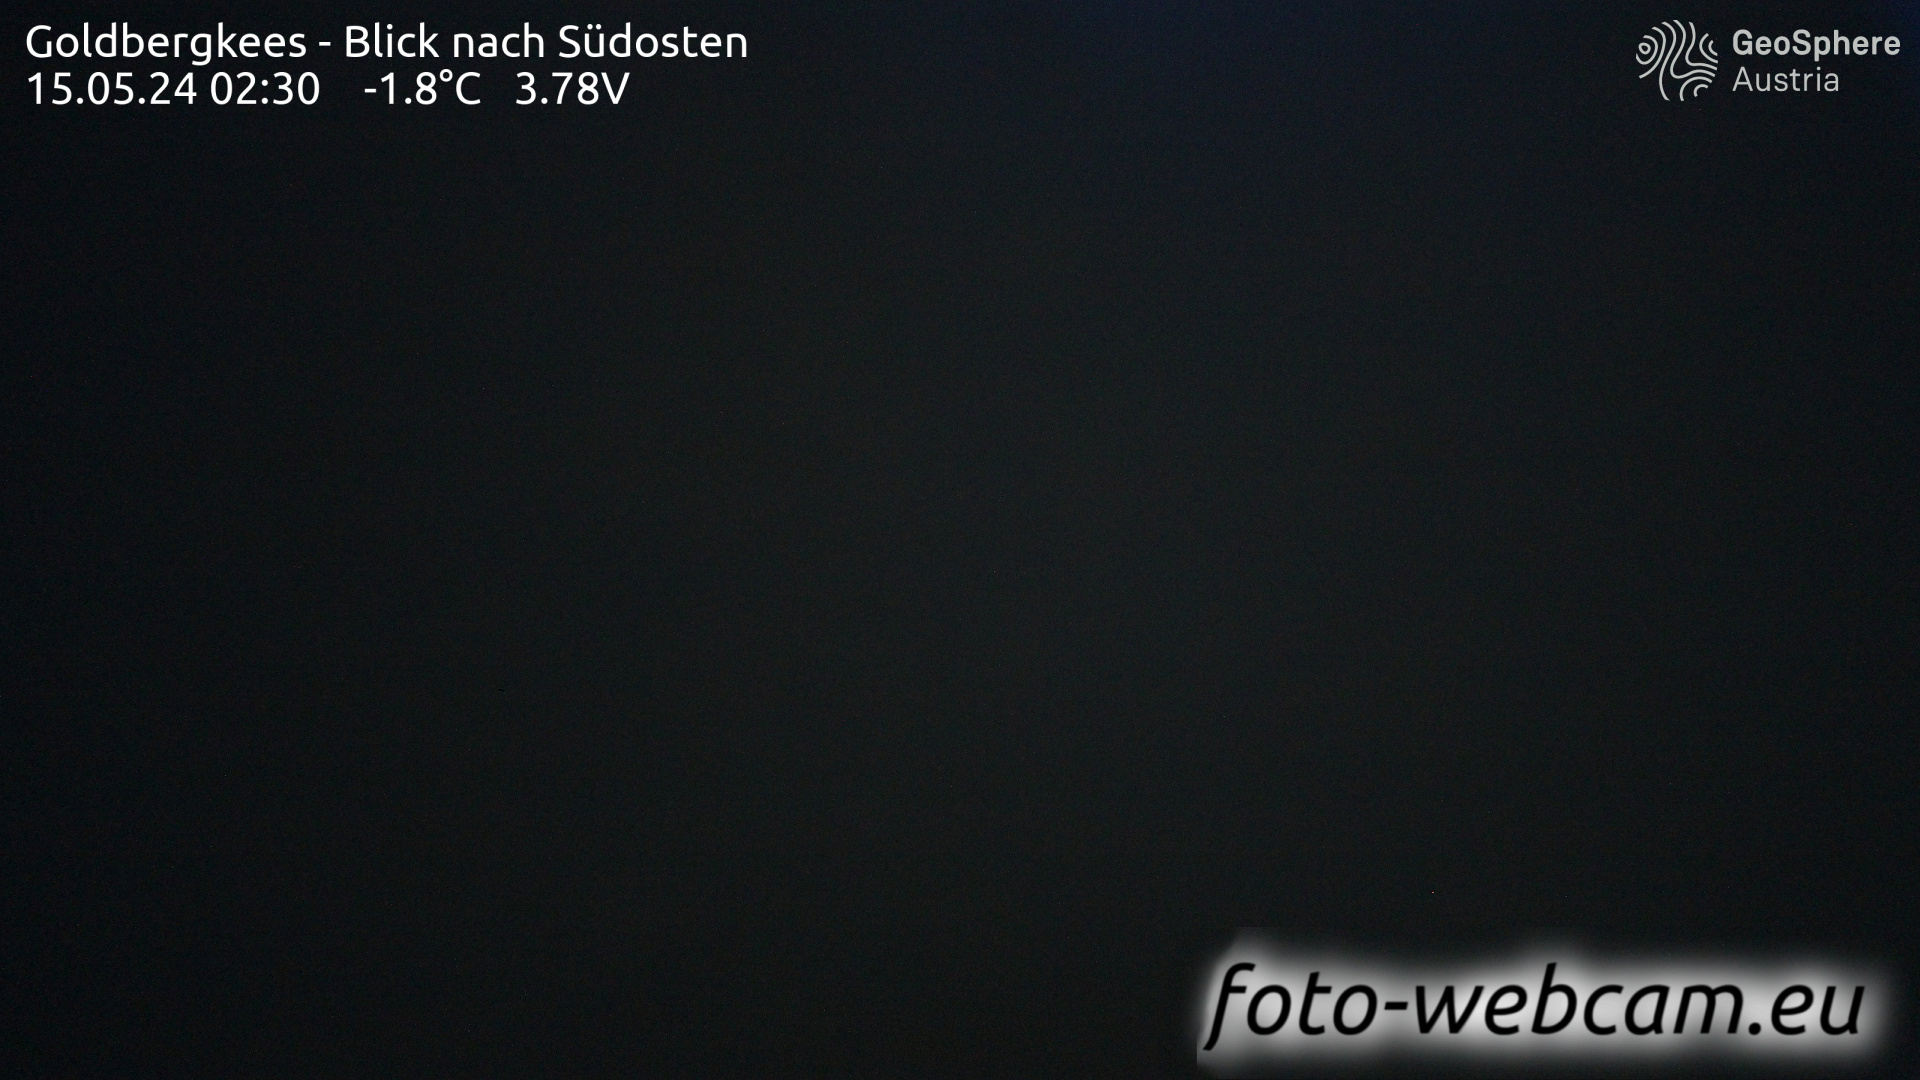 Hoher Sonnblick Thu. 02:55